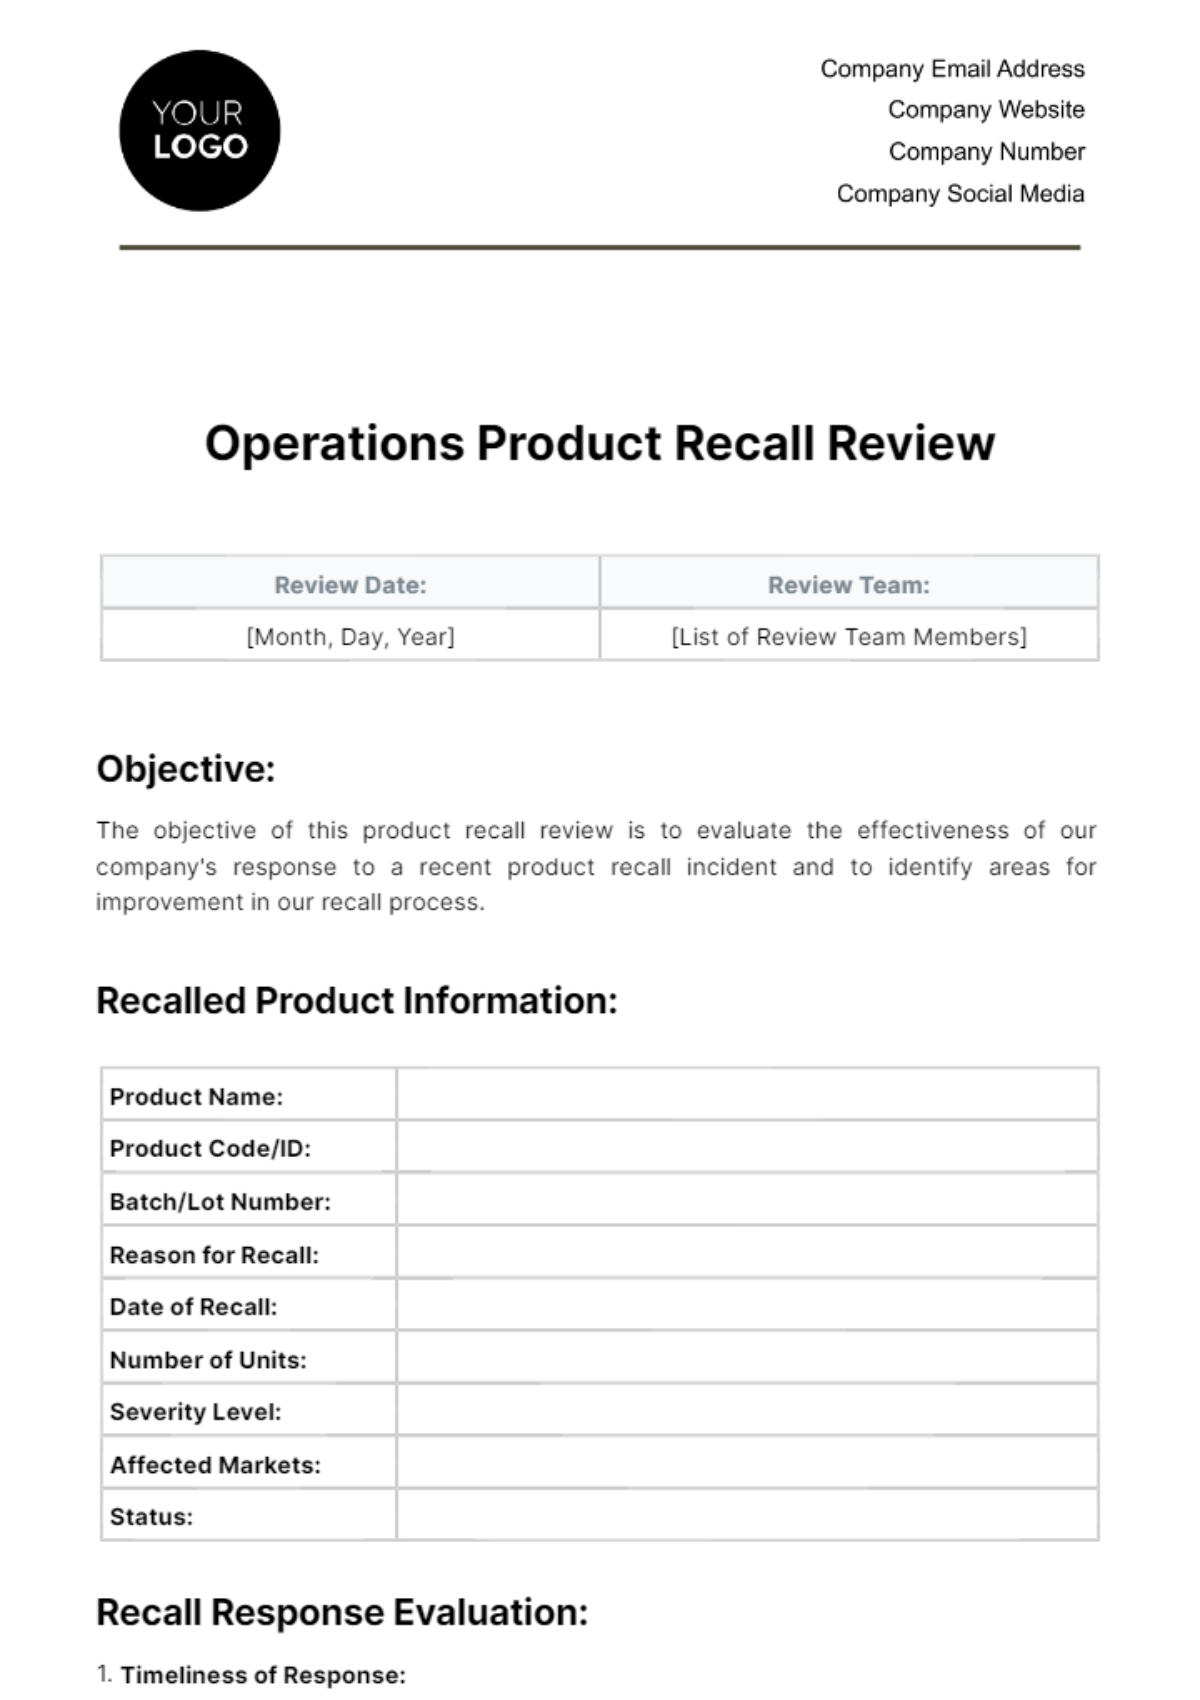 Operations Product Recall Review Template